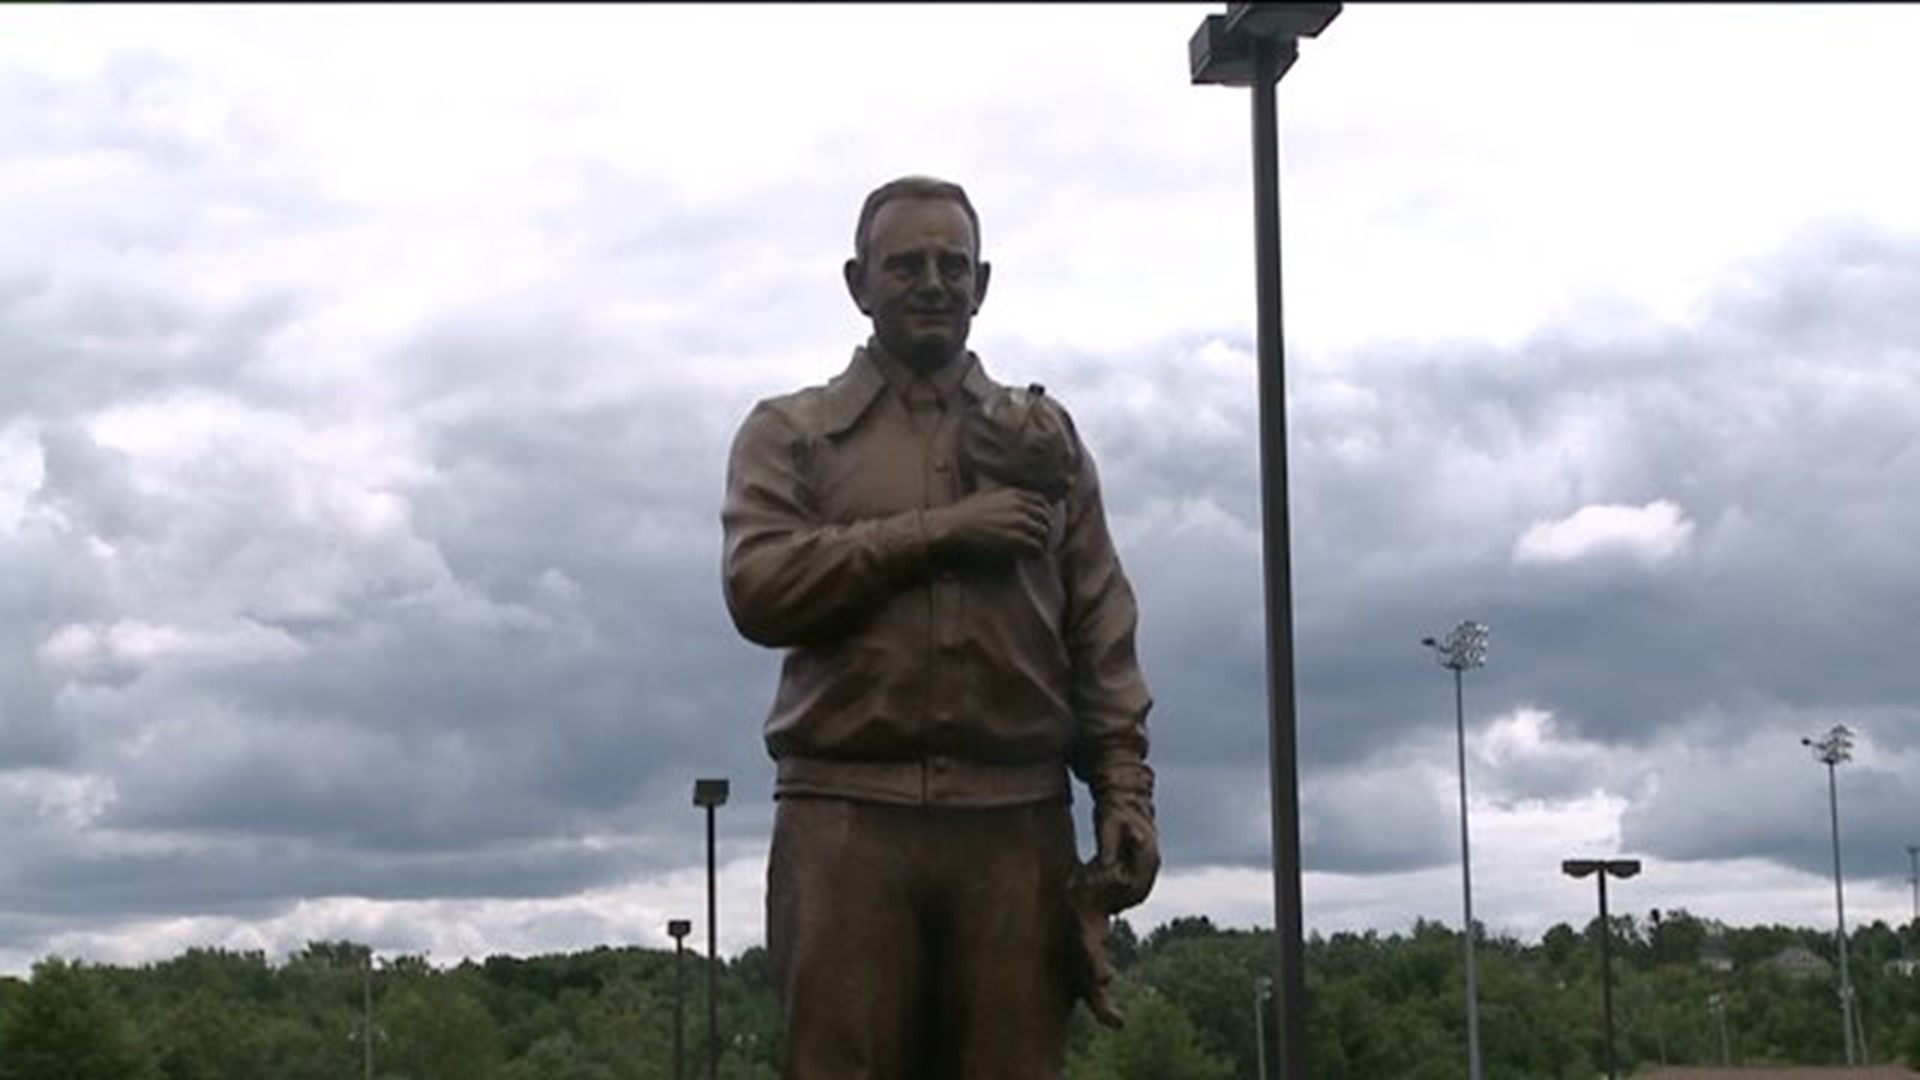 "Papa Bear" Statue Moved to New Location